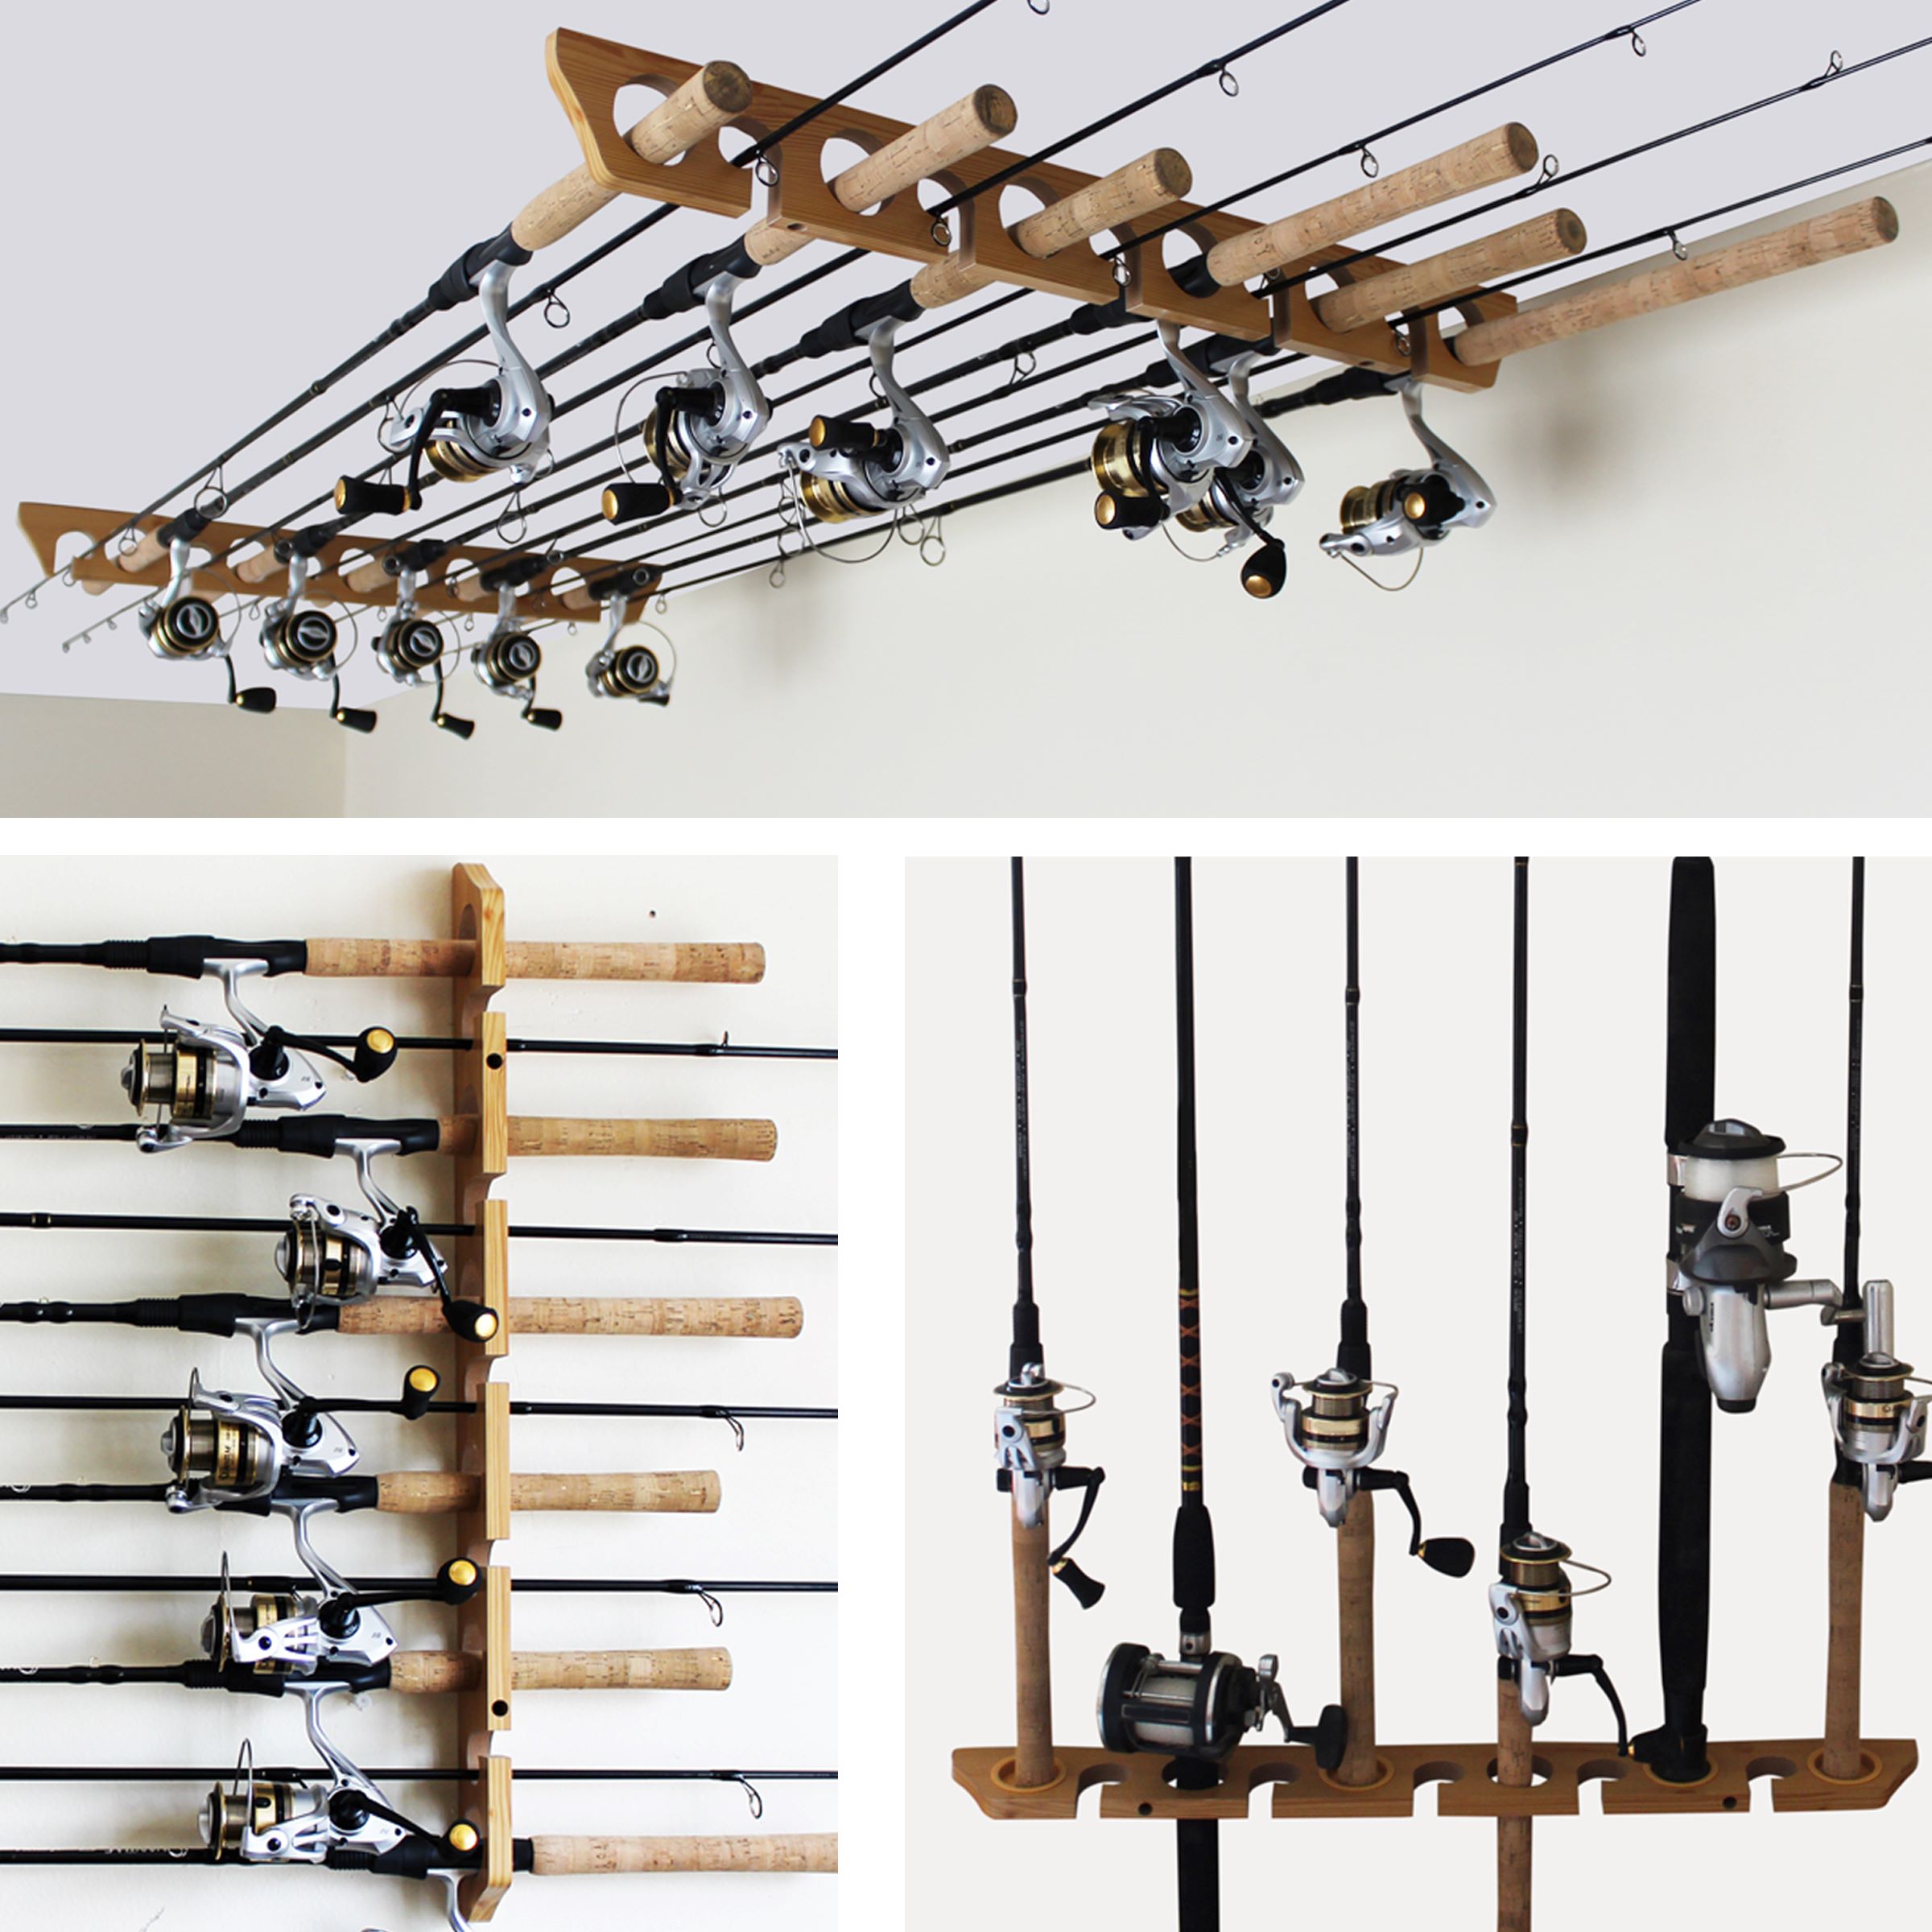 11 INSHORE Fishing Rod Rack Fishing Pole Reel Holder / Organizer Mounts to  Wall or Ceiling Garage Rack Perfect Father's Day Gift -  Canada